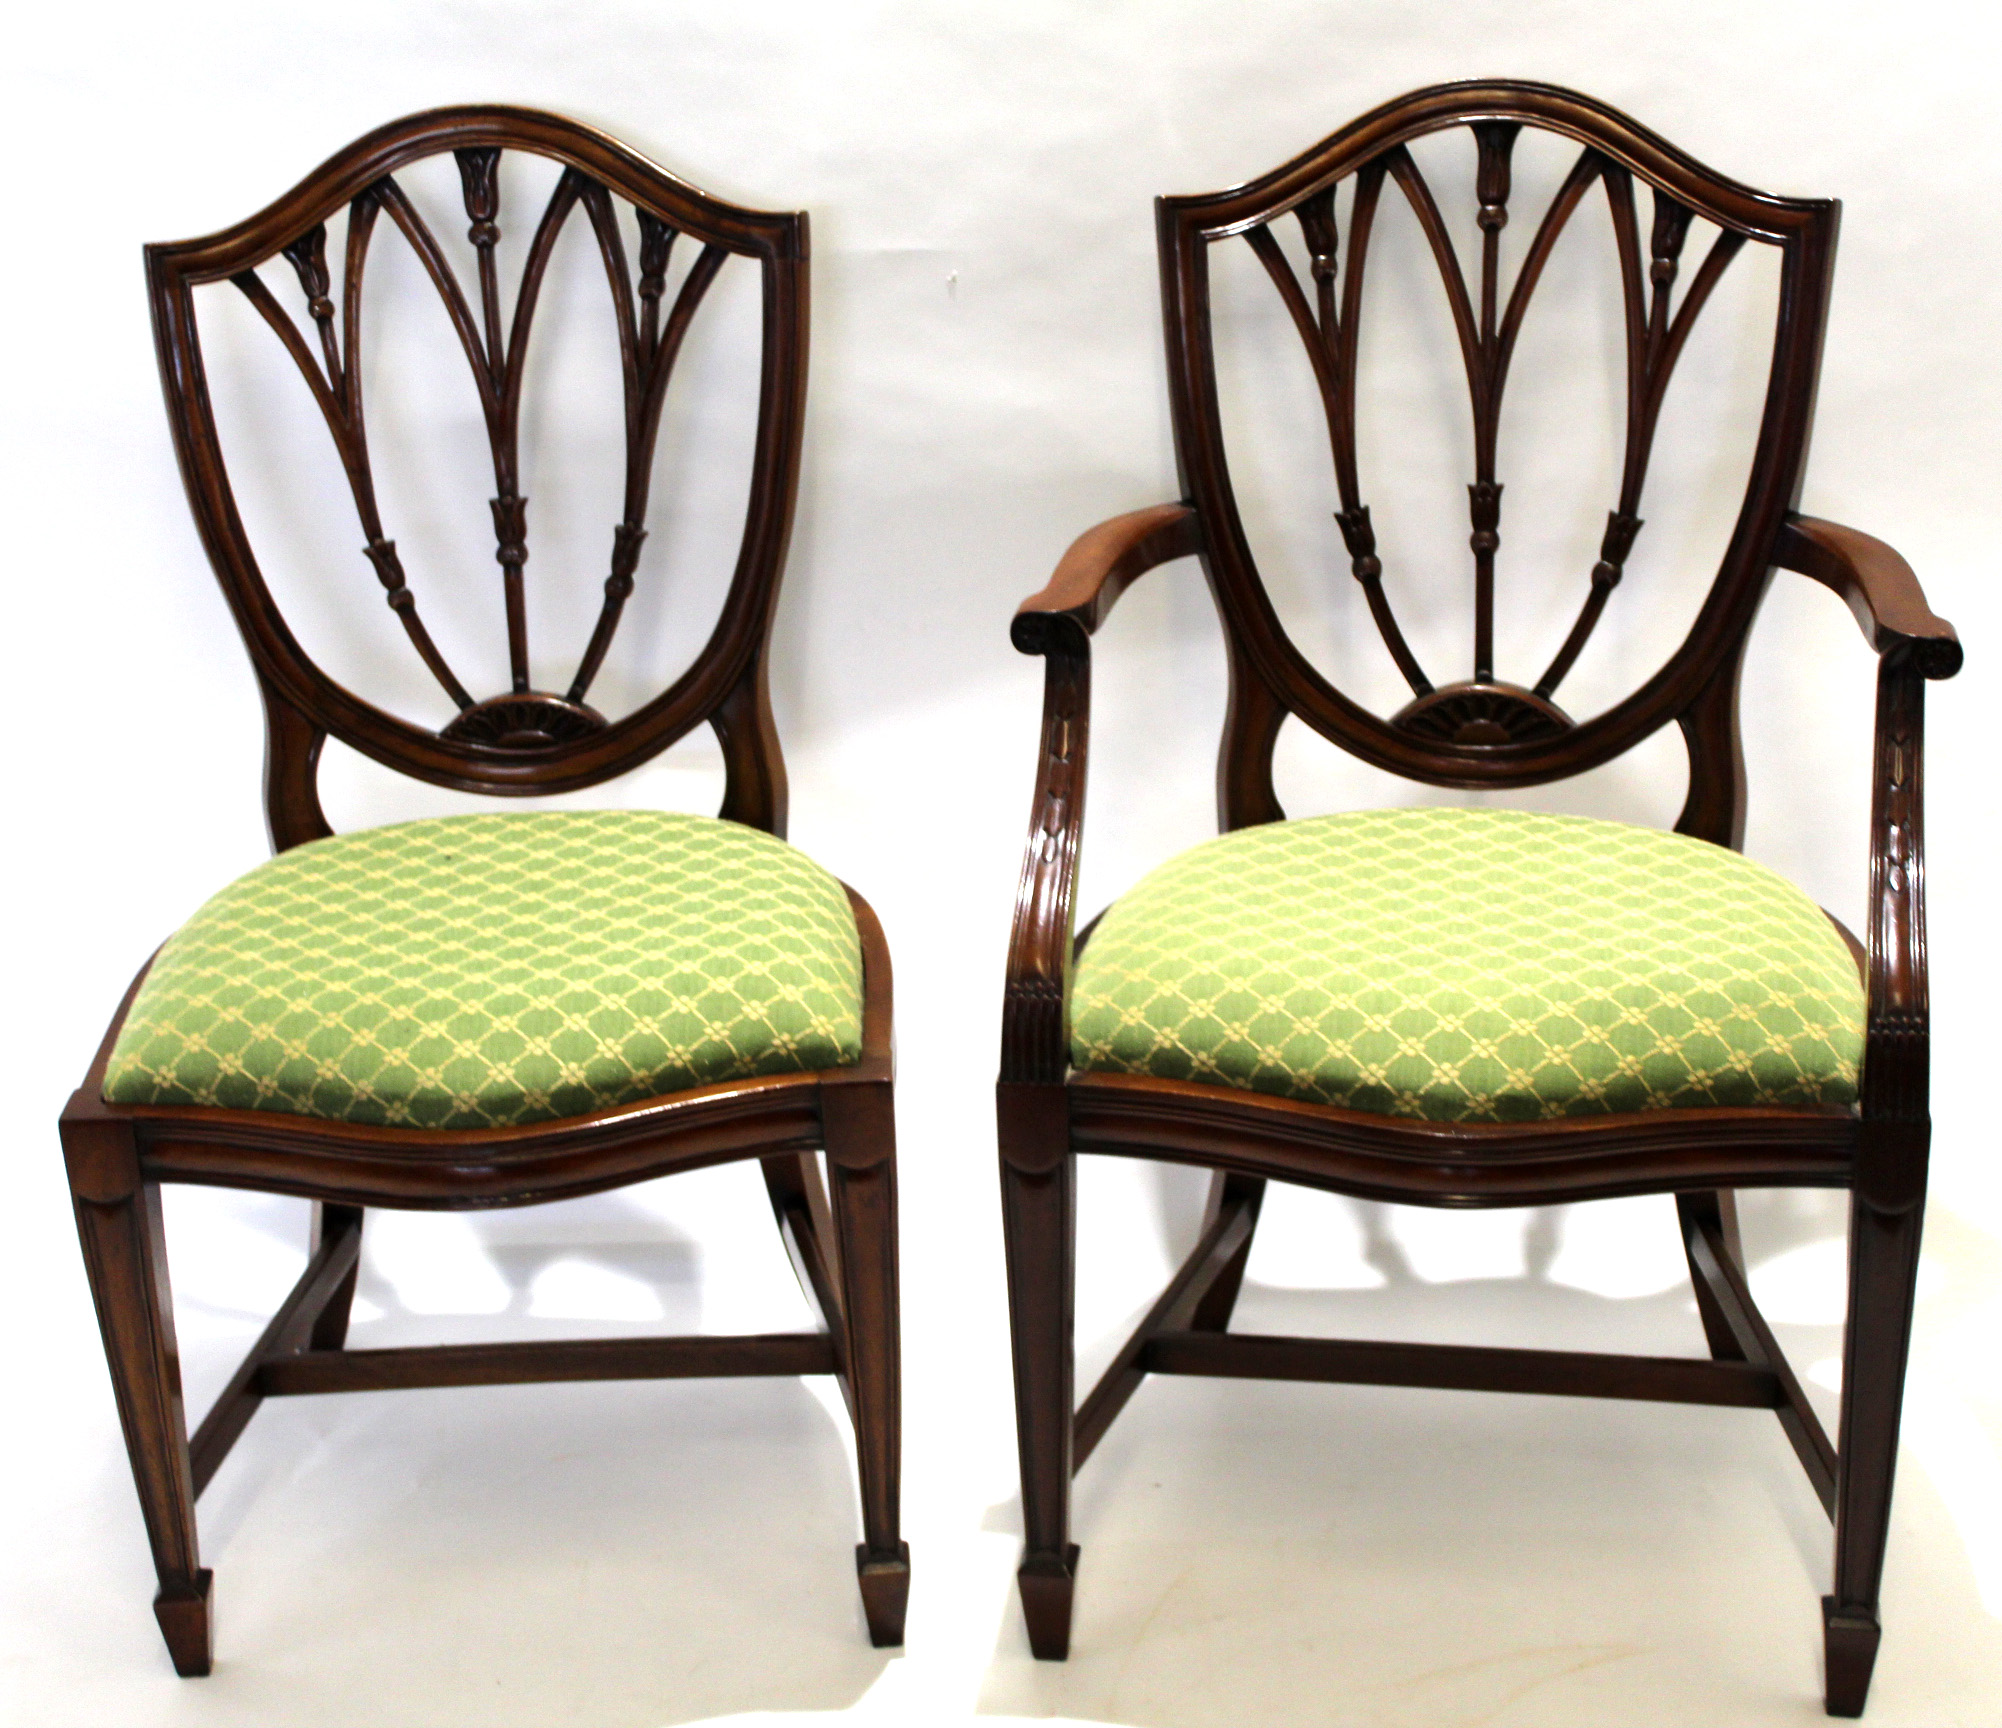 Good quality set of 12 (10+2) Hepplewhite style mahogany dining chairs with triple pierced bar